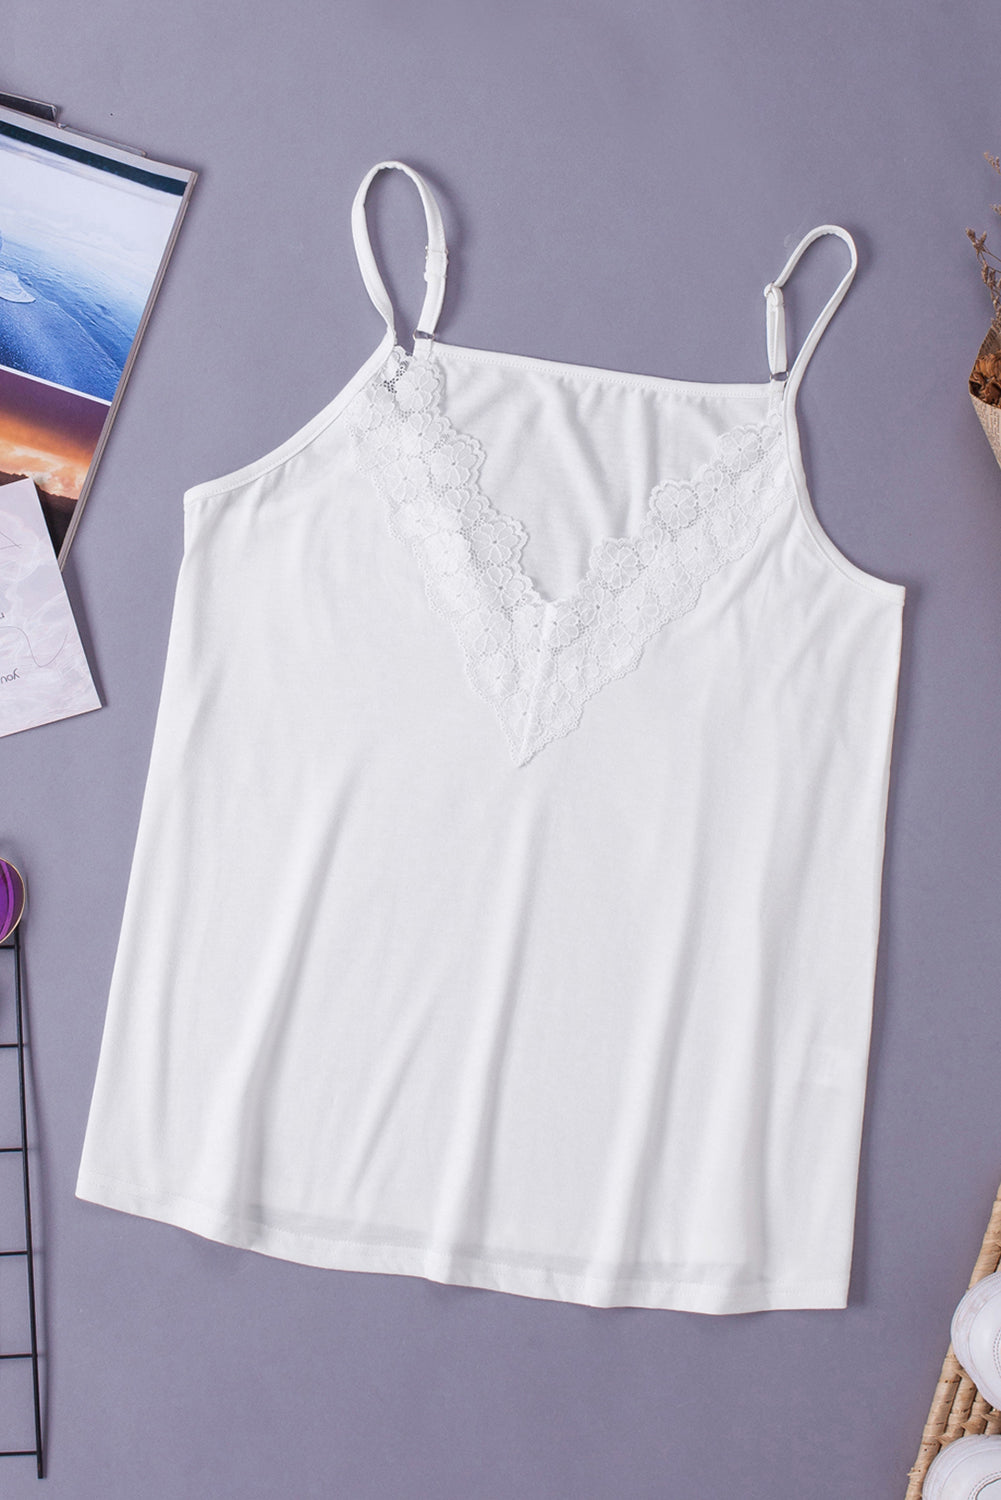 Chic White Lace Camisole Top